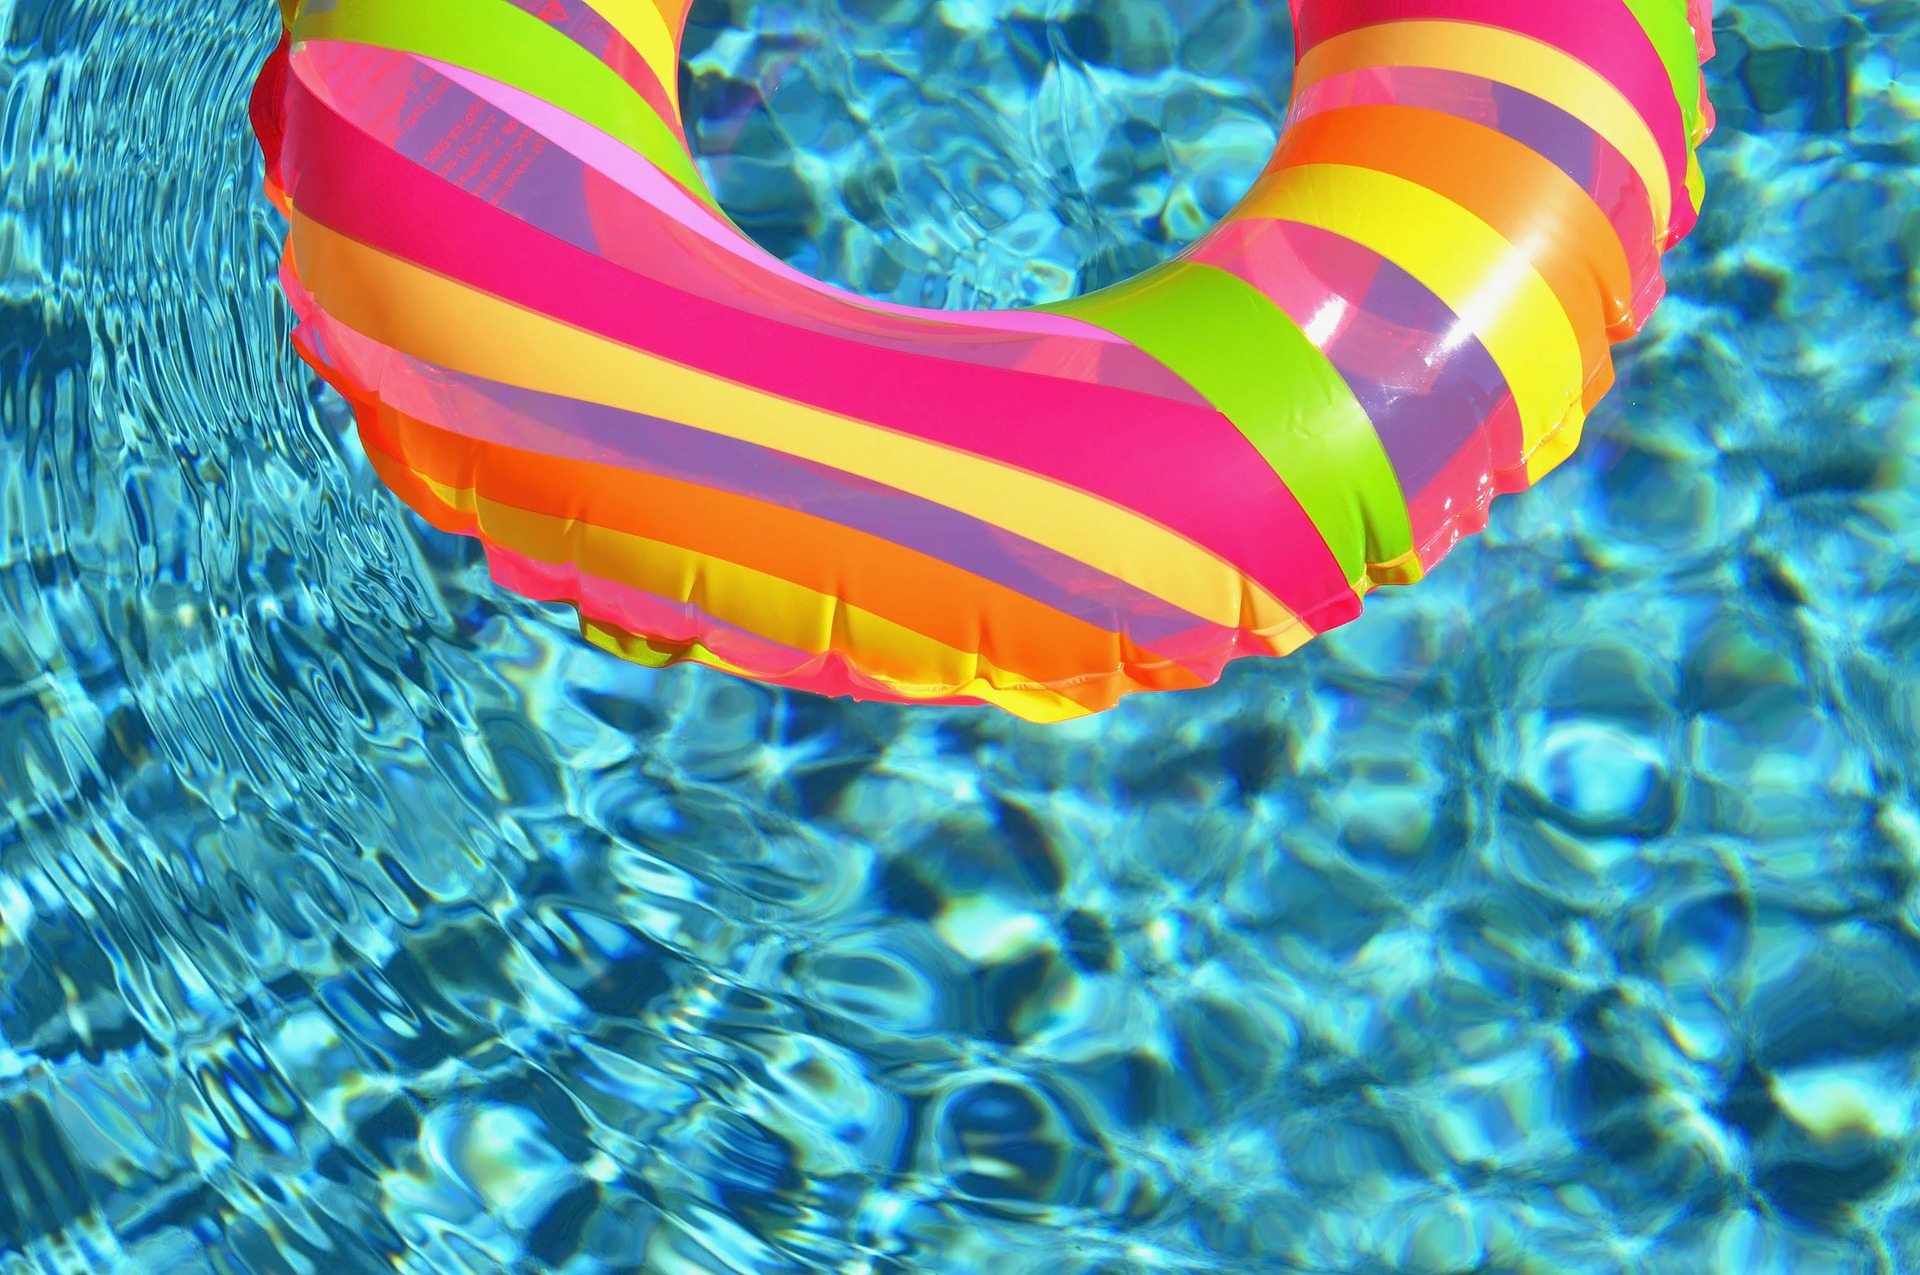 A blow-up swimming ring in a pool